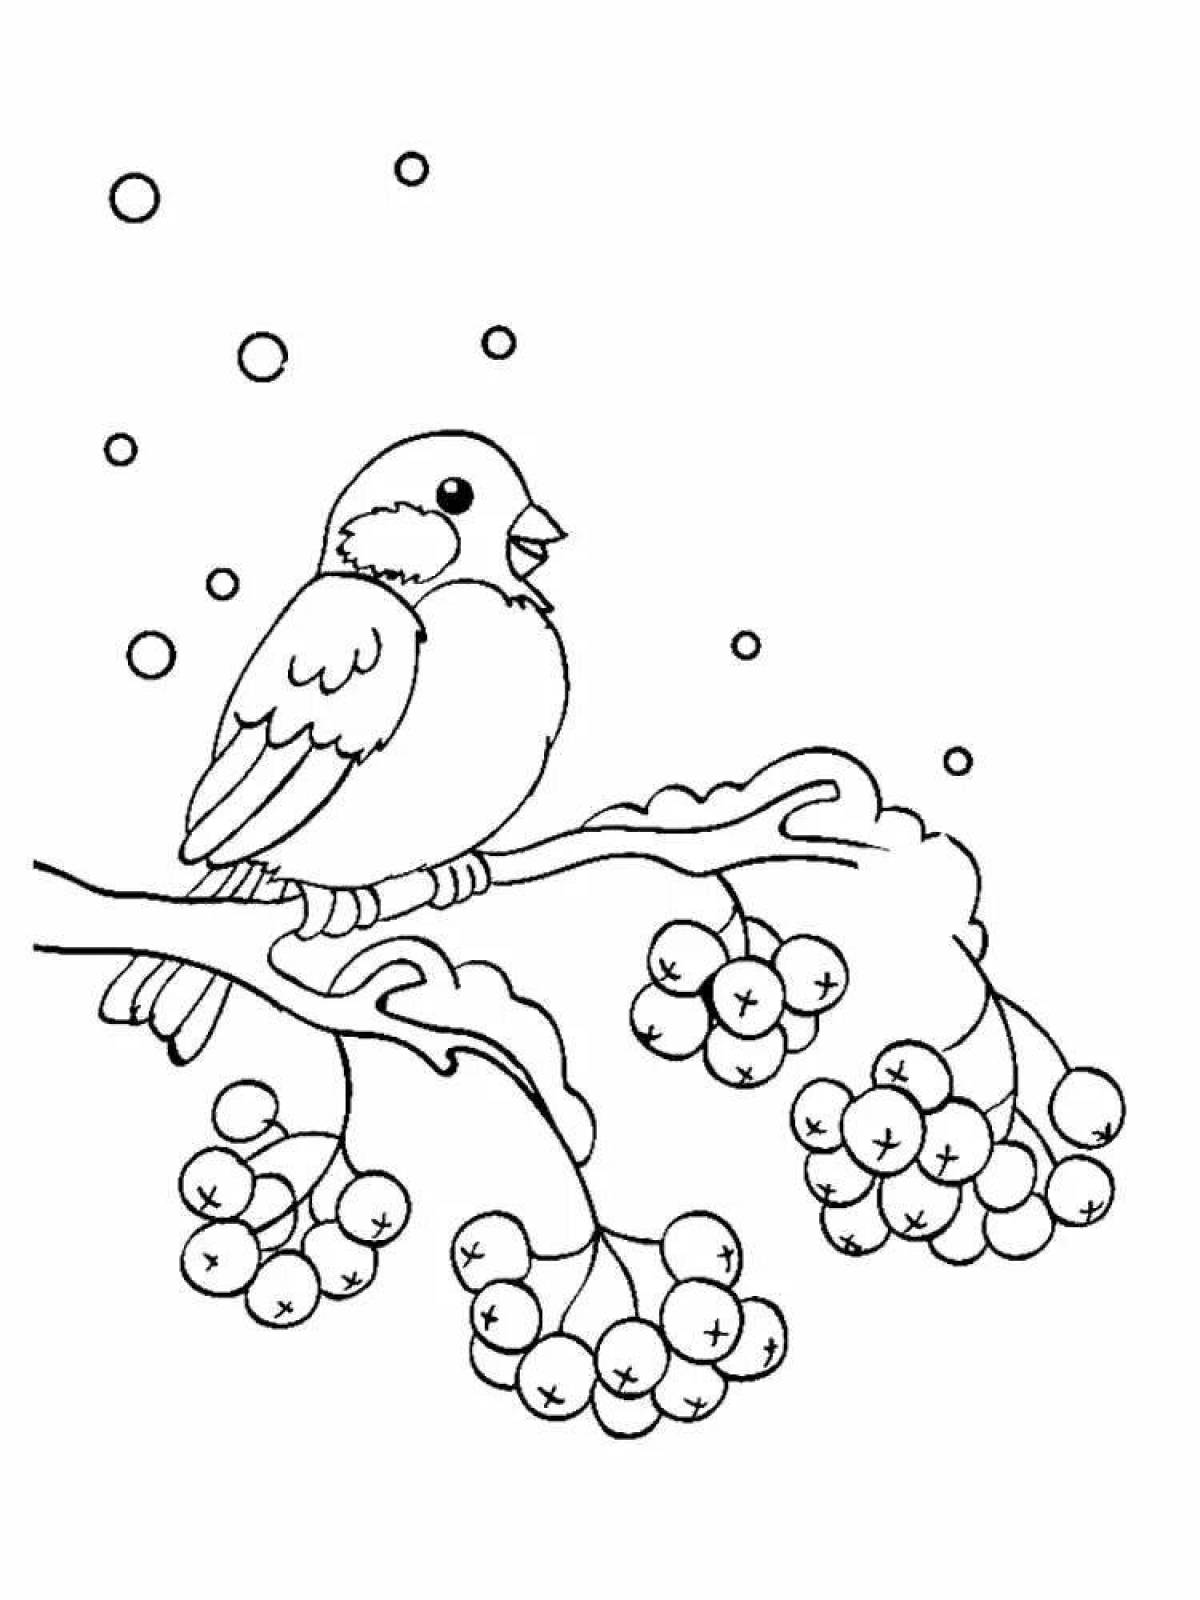 Colorful wintering birds coloring page